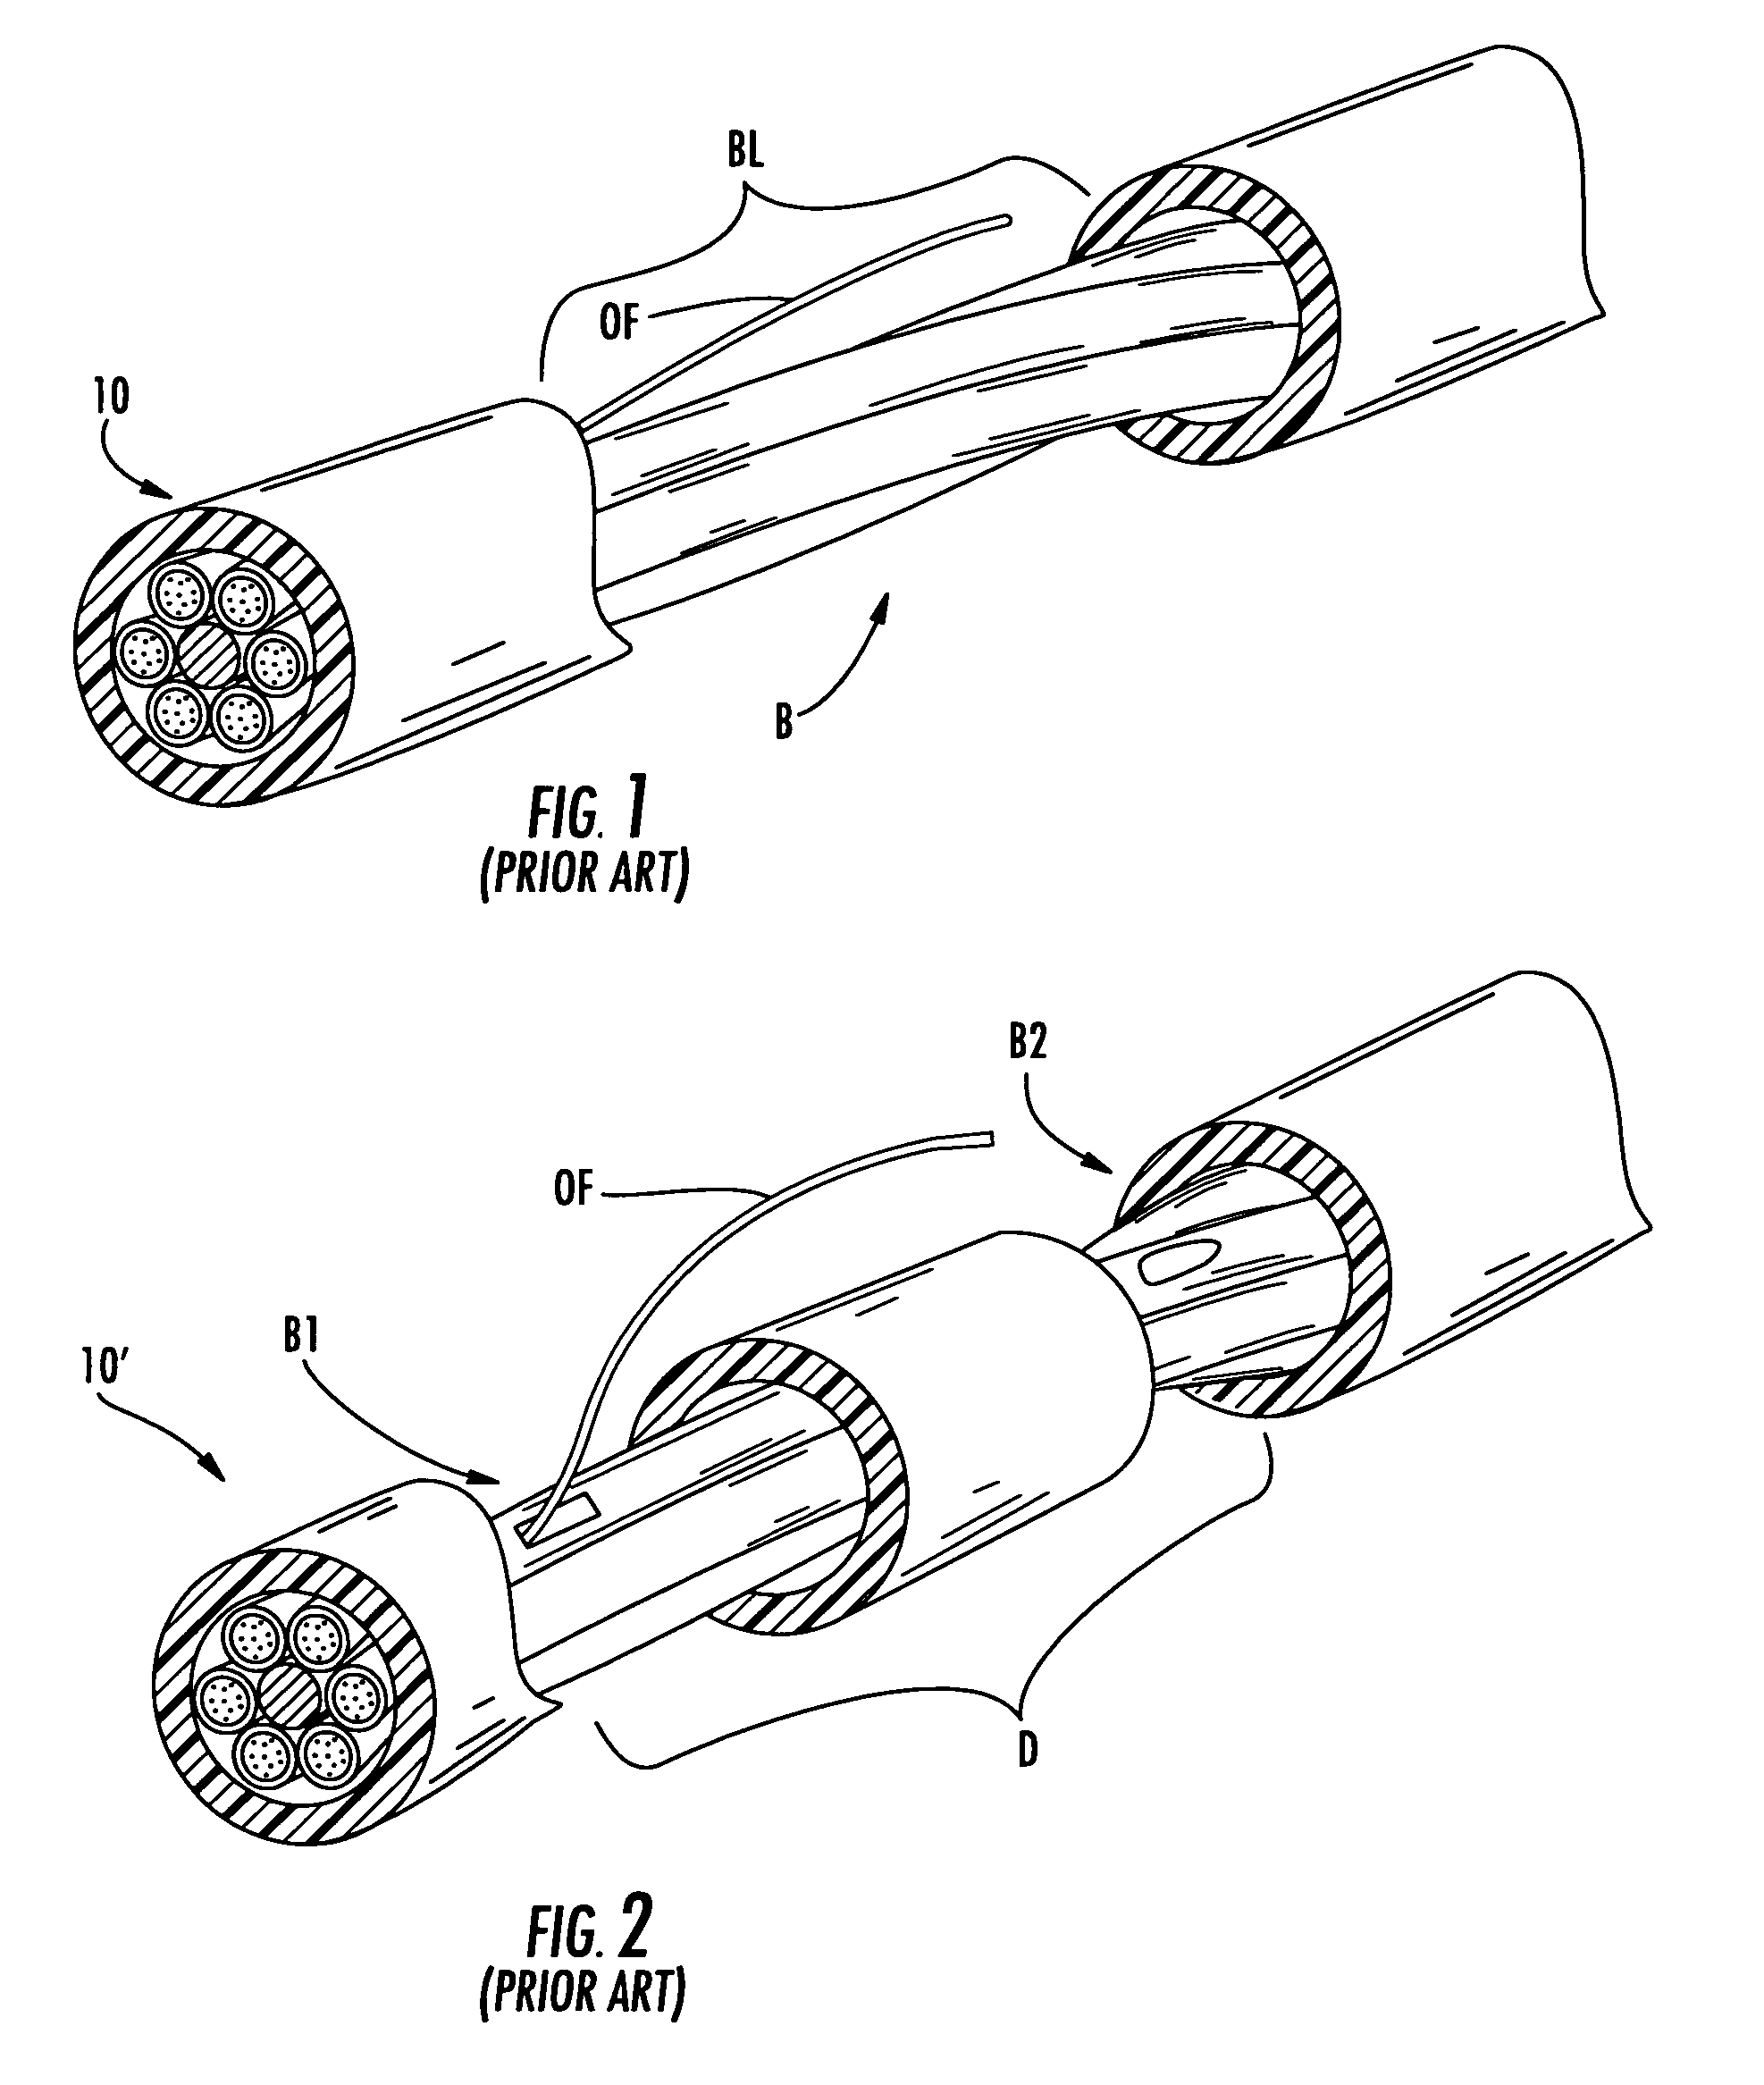 Methods for manufacturing fiber optic distribution cables